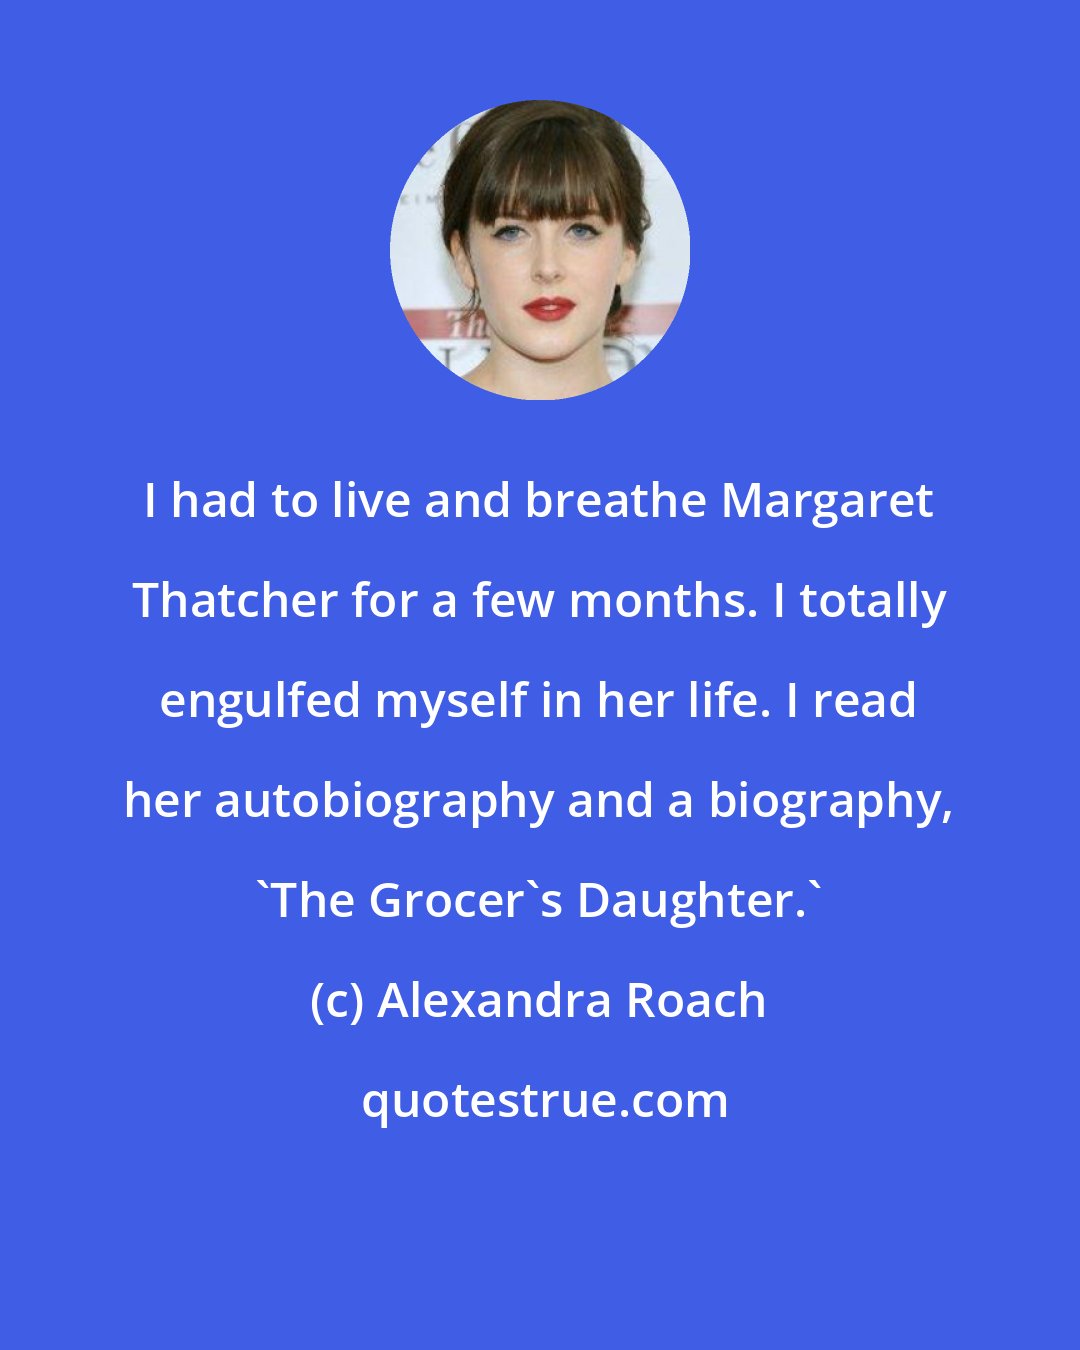 Alexandra Roach: I had to live and breathe Margaret Thatcher for a few months. I totally engulfed myself in her life. I read her autobiography and a biography, 'The Grocer's Daughter.'